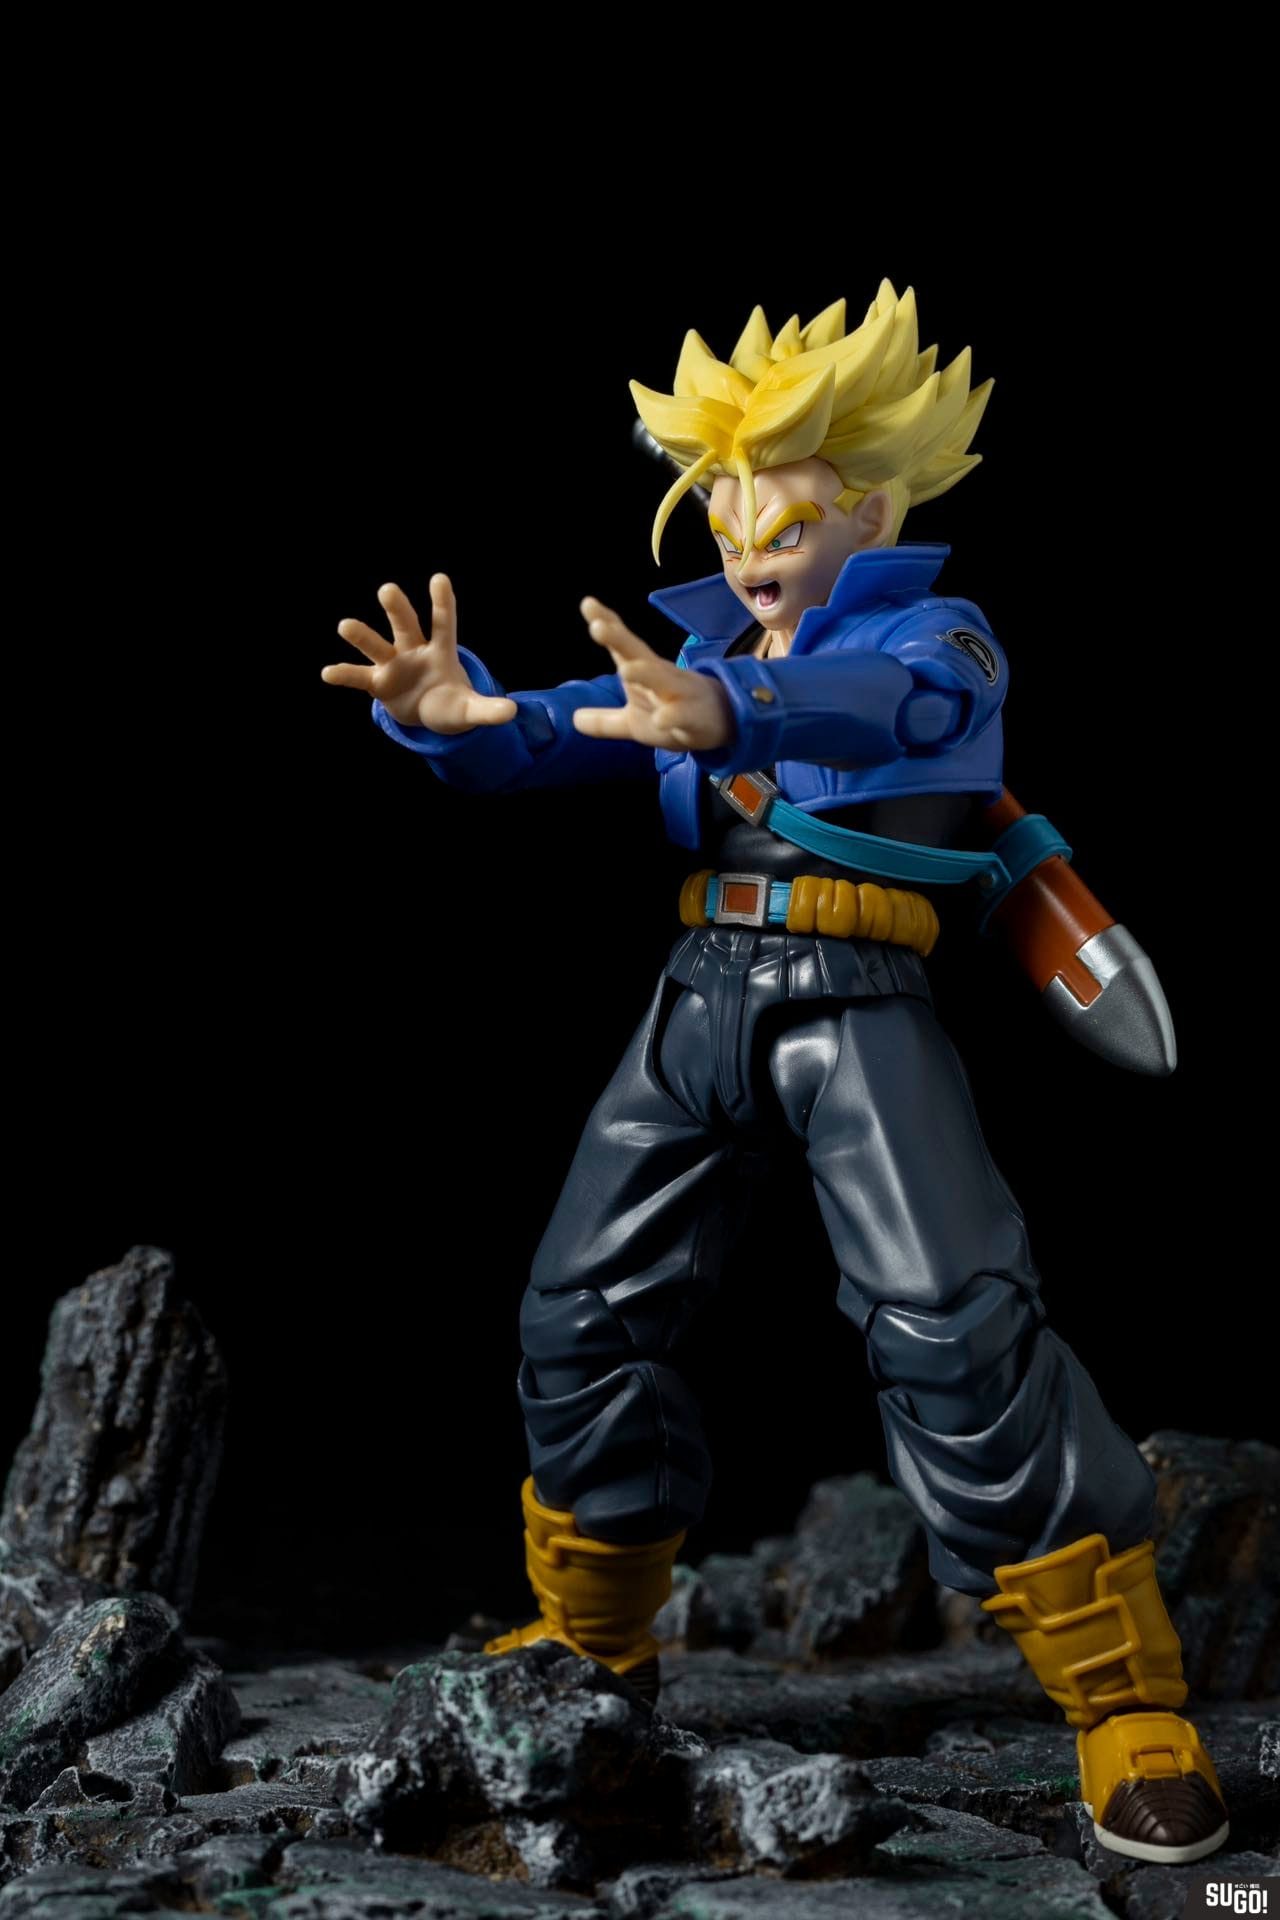 COMPARISON SH Figuarts Trunks Premium Color and The Boy from The